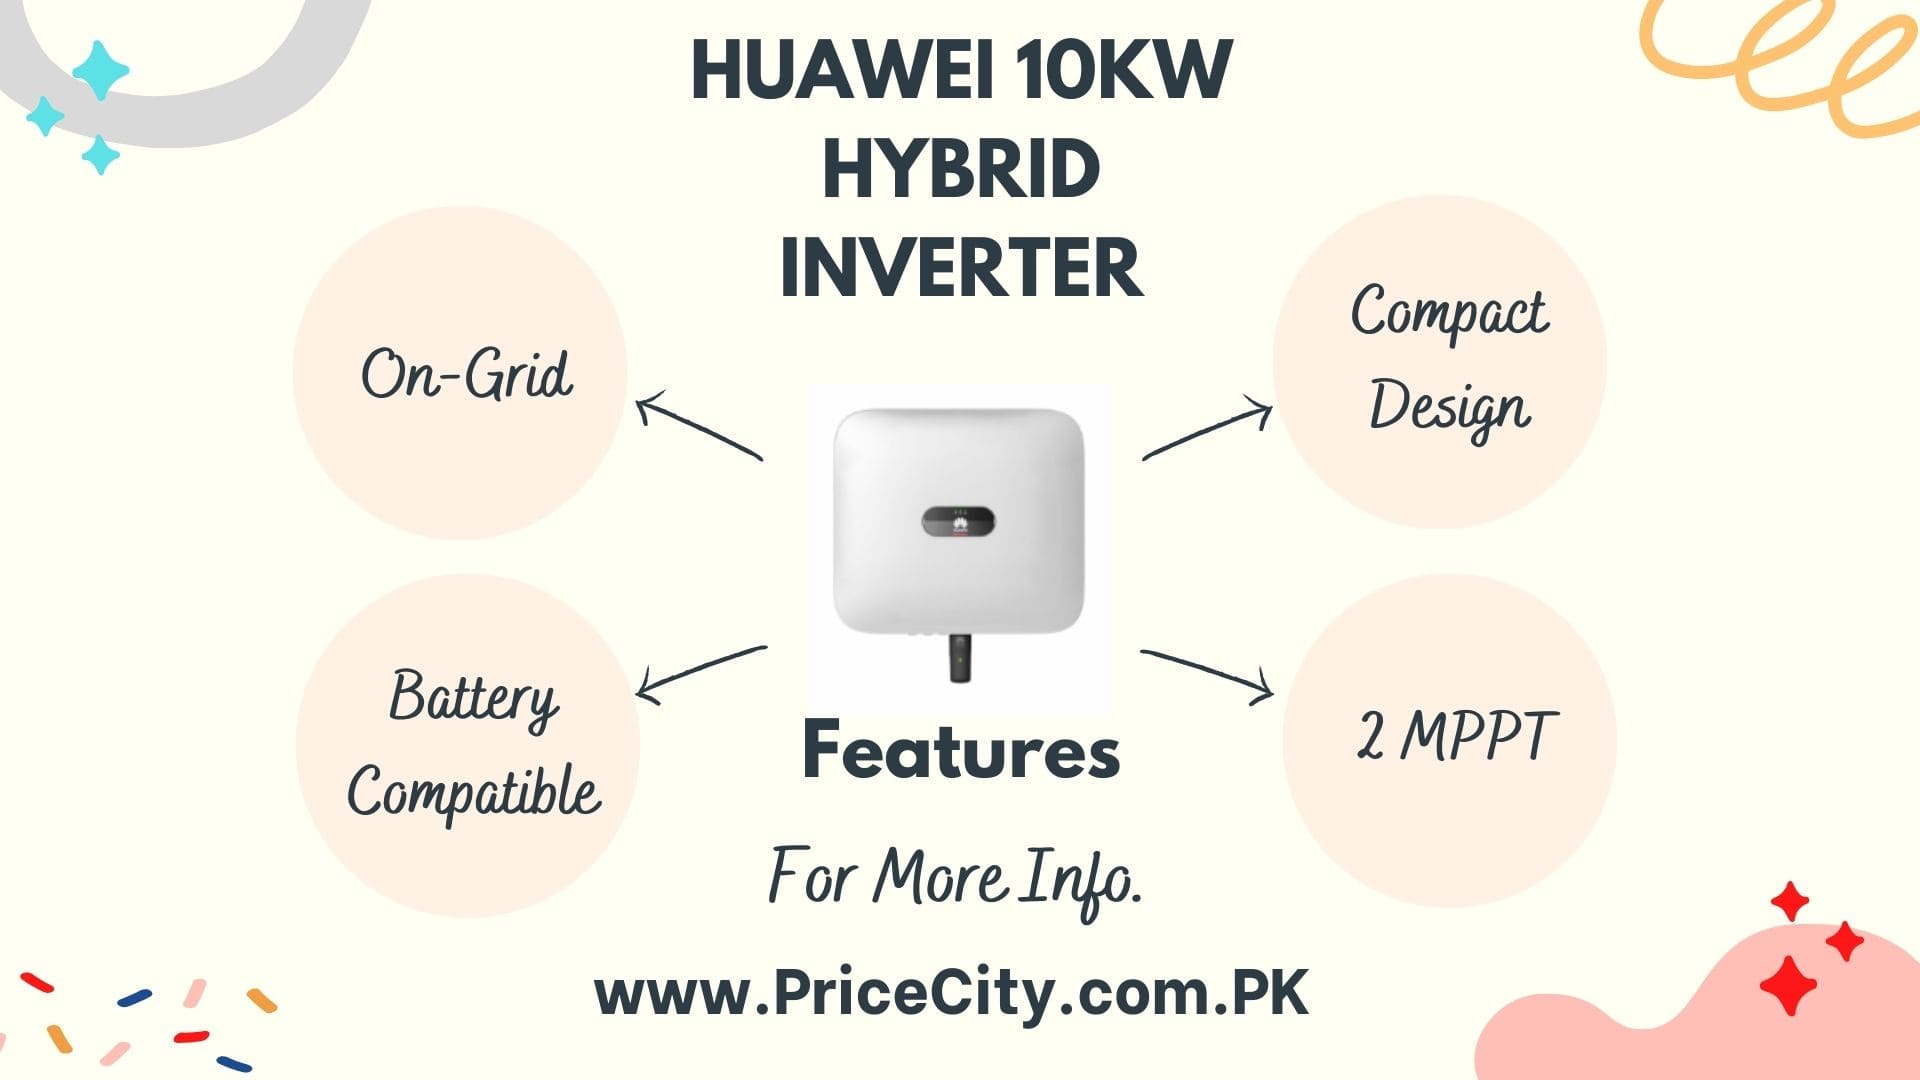 Huawei 10kW inverter Features